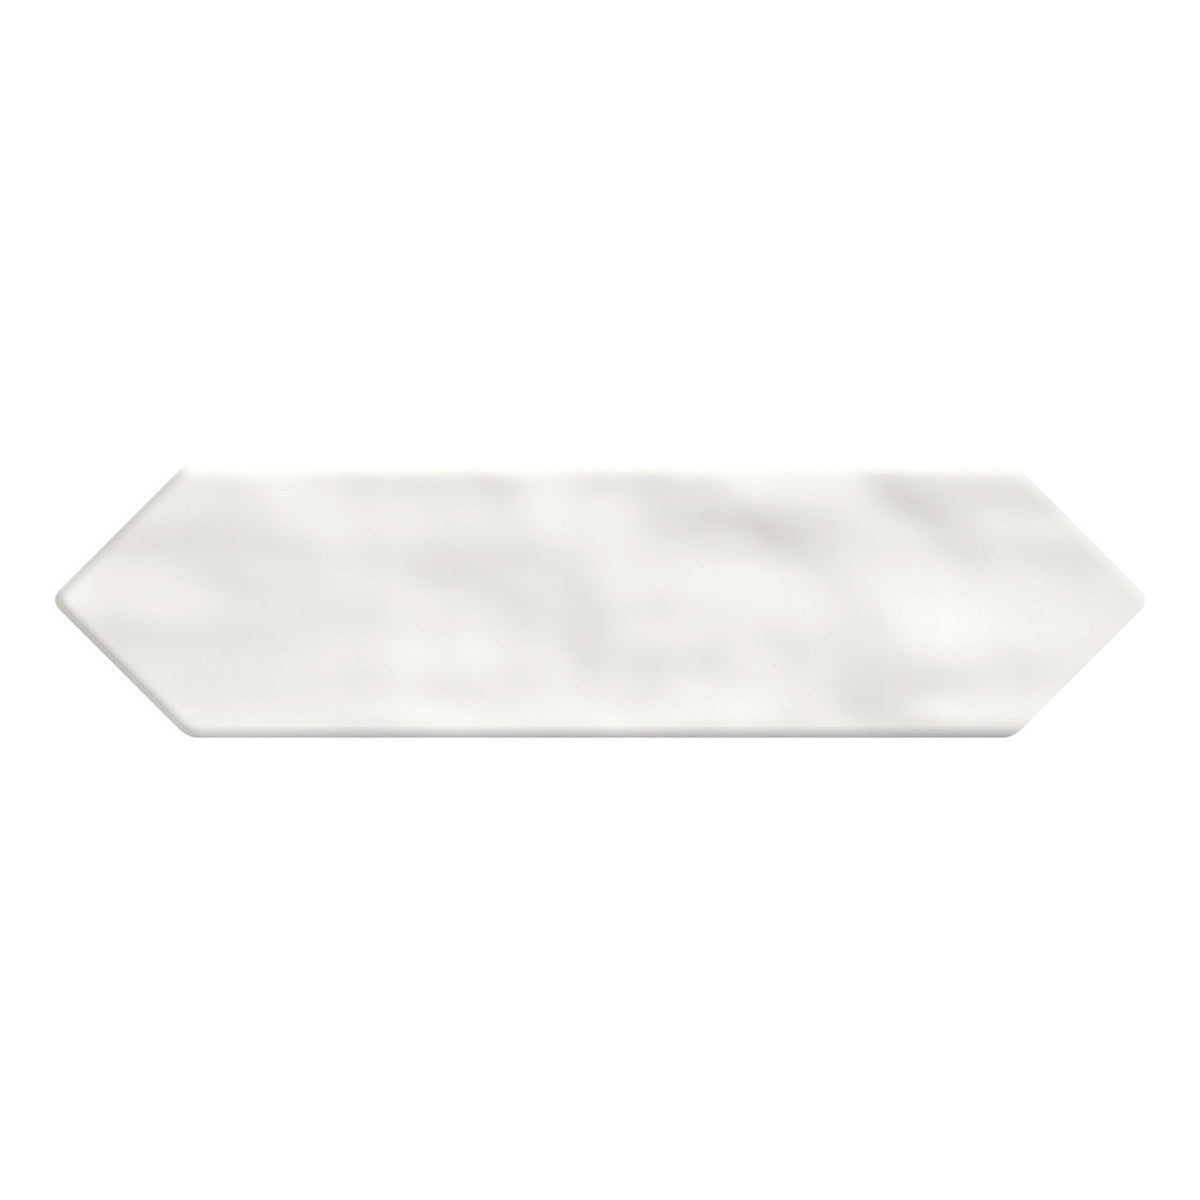 Daltile - Stagecraft - 3 in. x 12 in. Picket Wall Tile - Matte Arctic White 0790